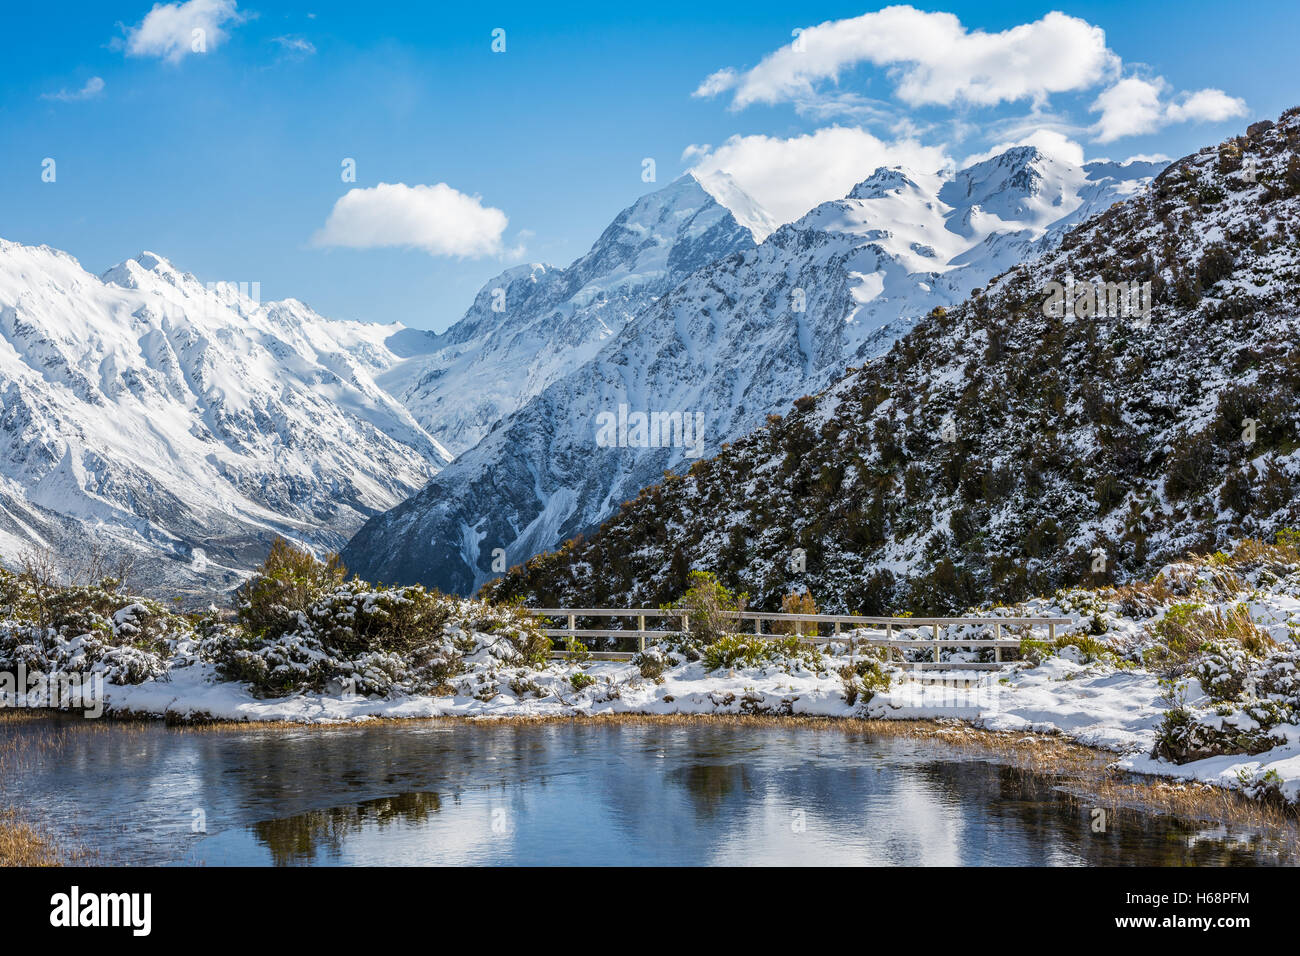 Beautiful Landscape of Mount Cook reflected in winter lake - New Zealand Stock Photo